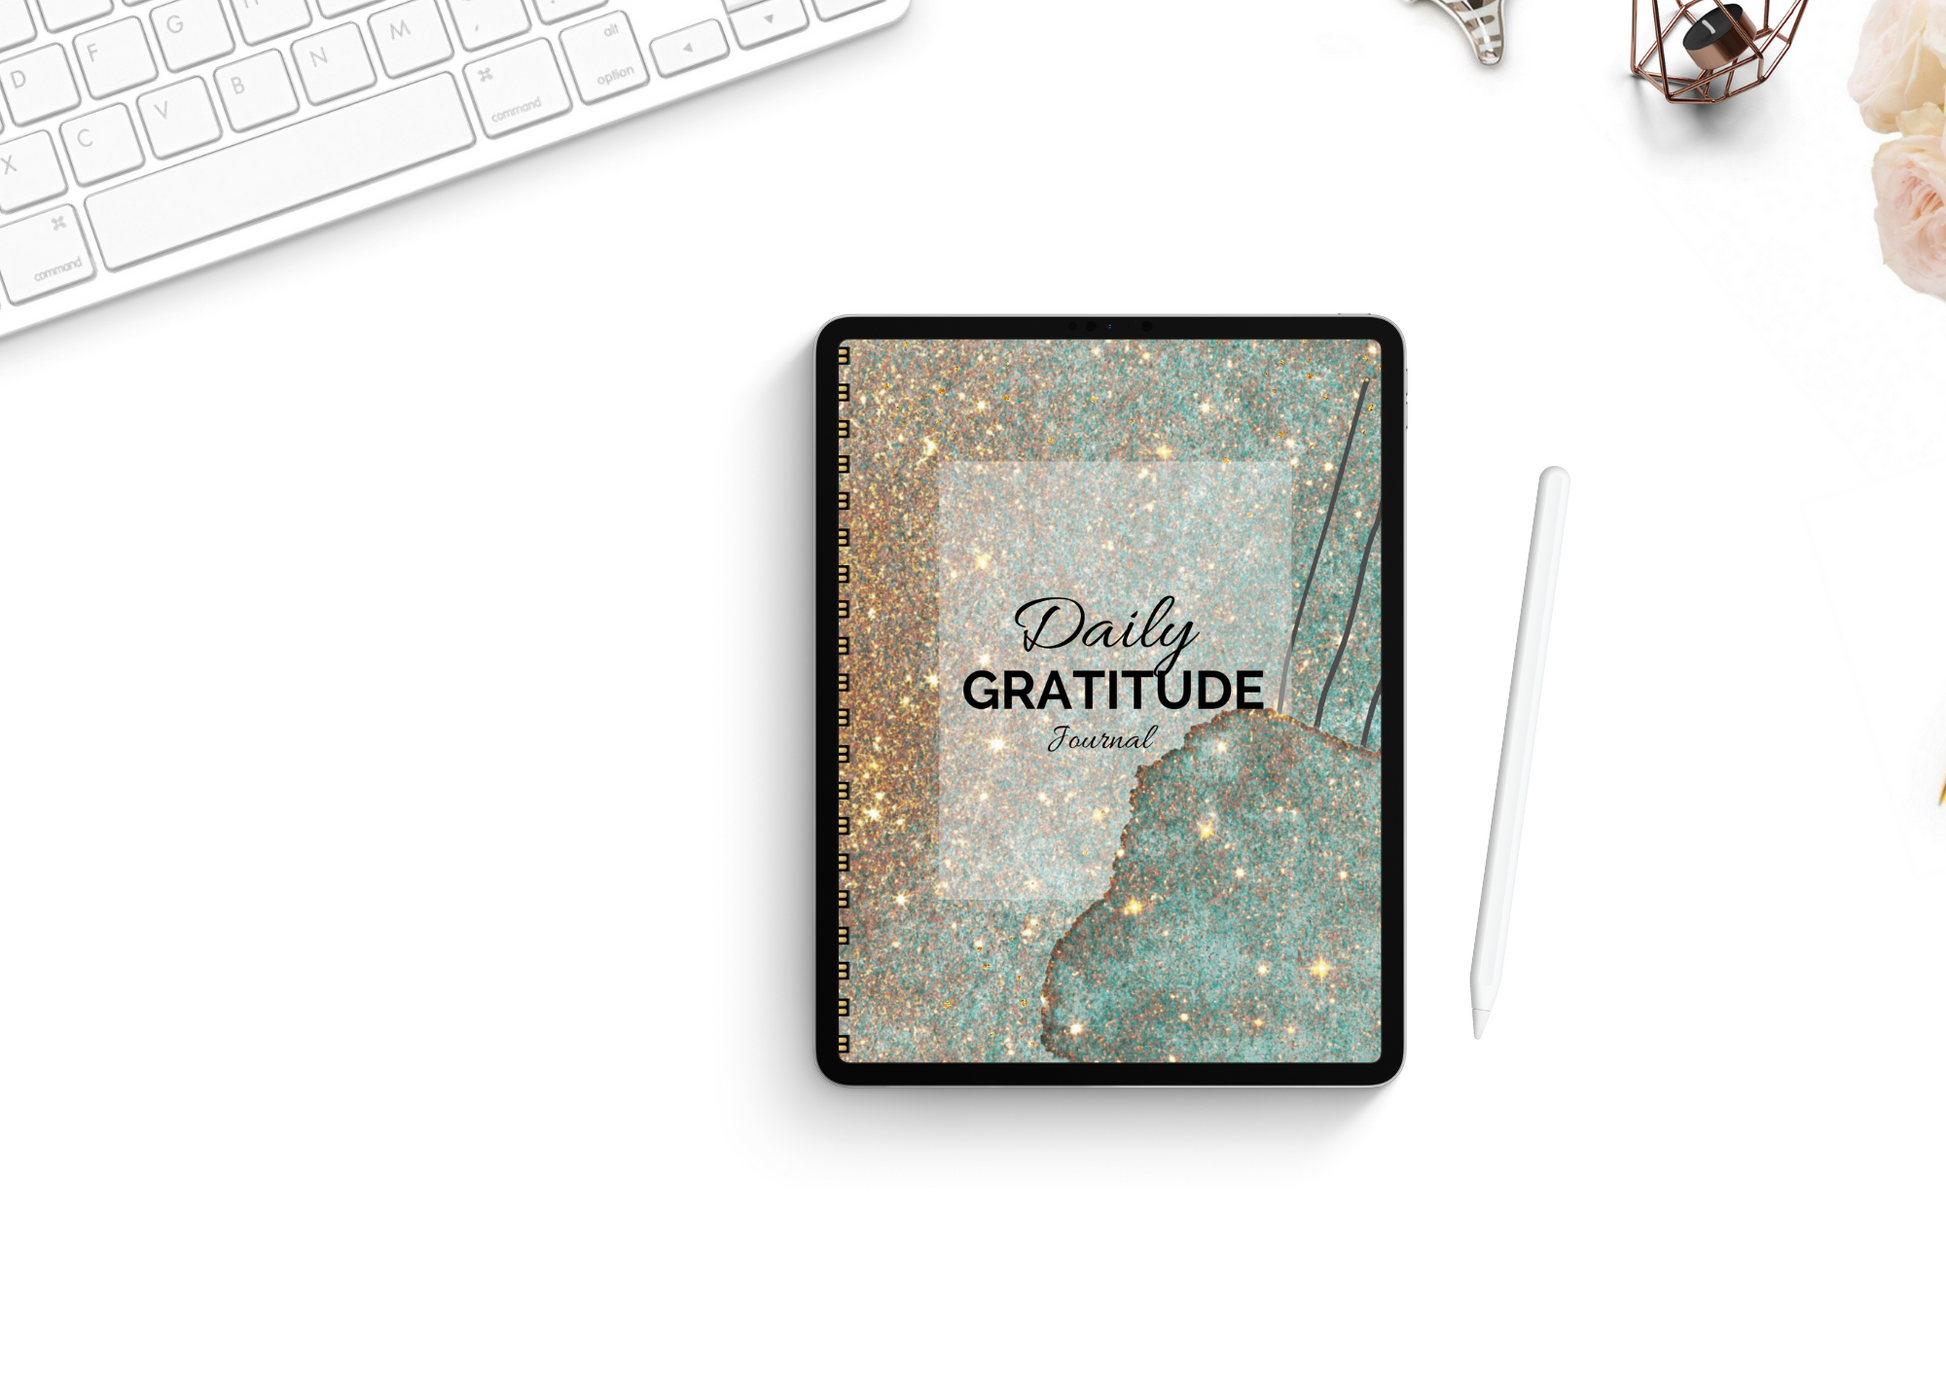 PLR Digital Gratitude Journal | Simple and Easy Digital Journal With 365 Pages For Commercial Use